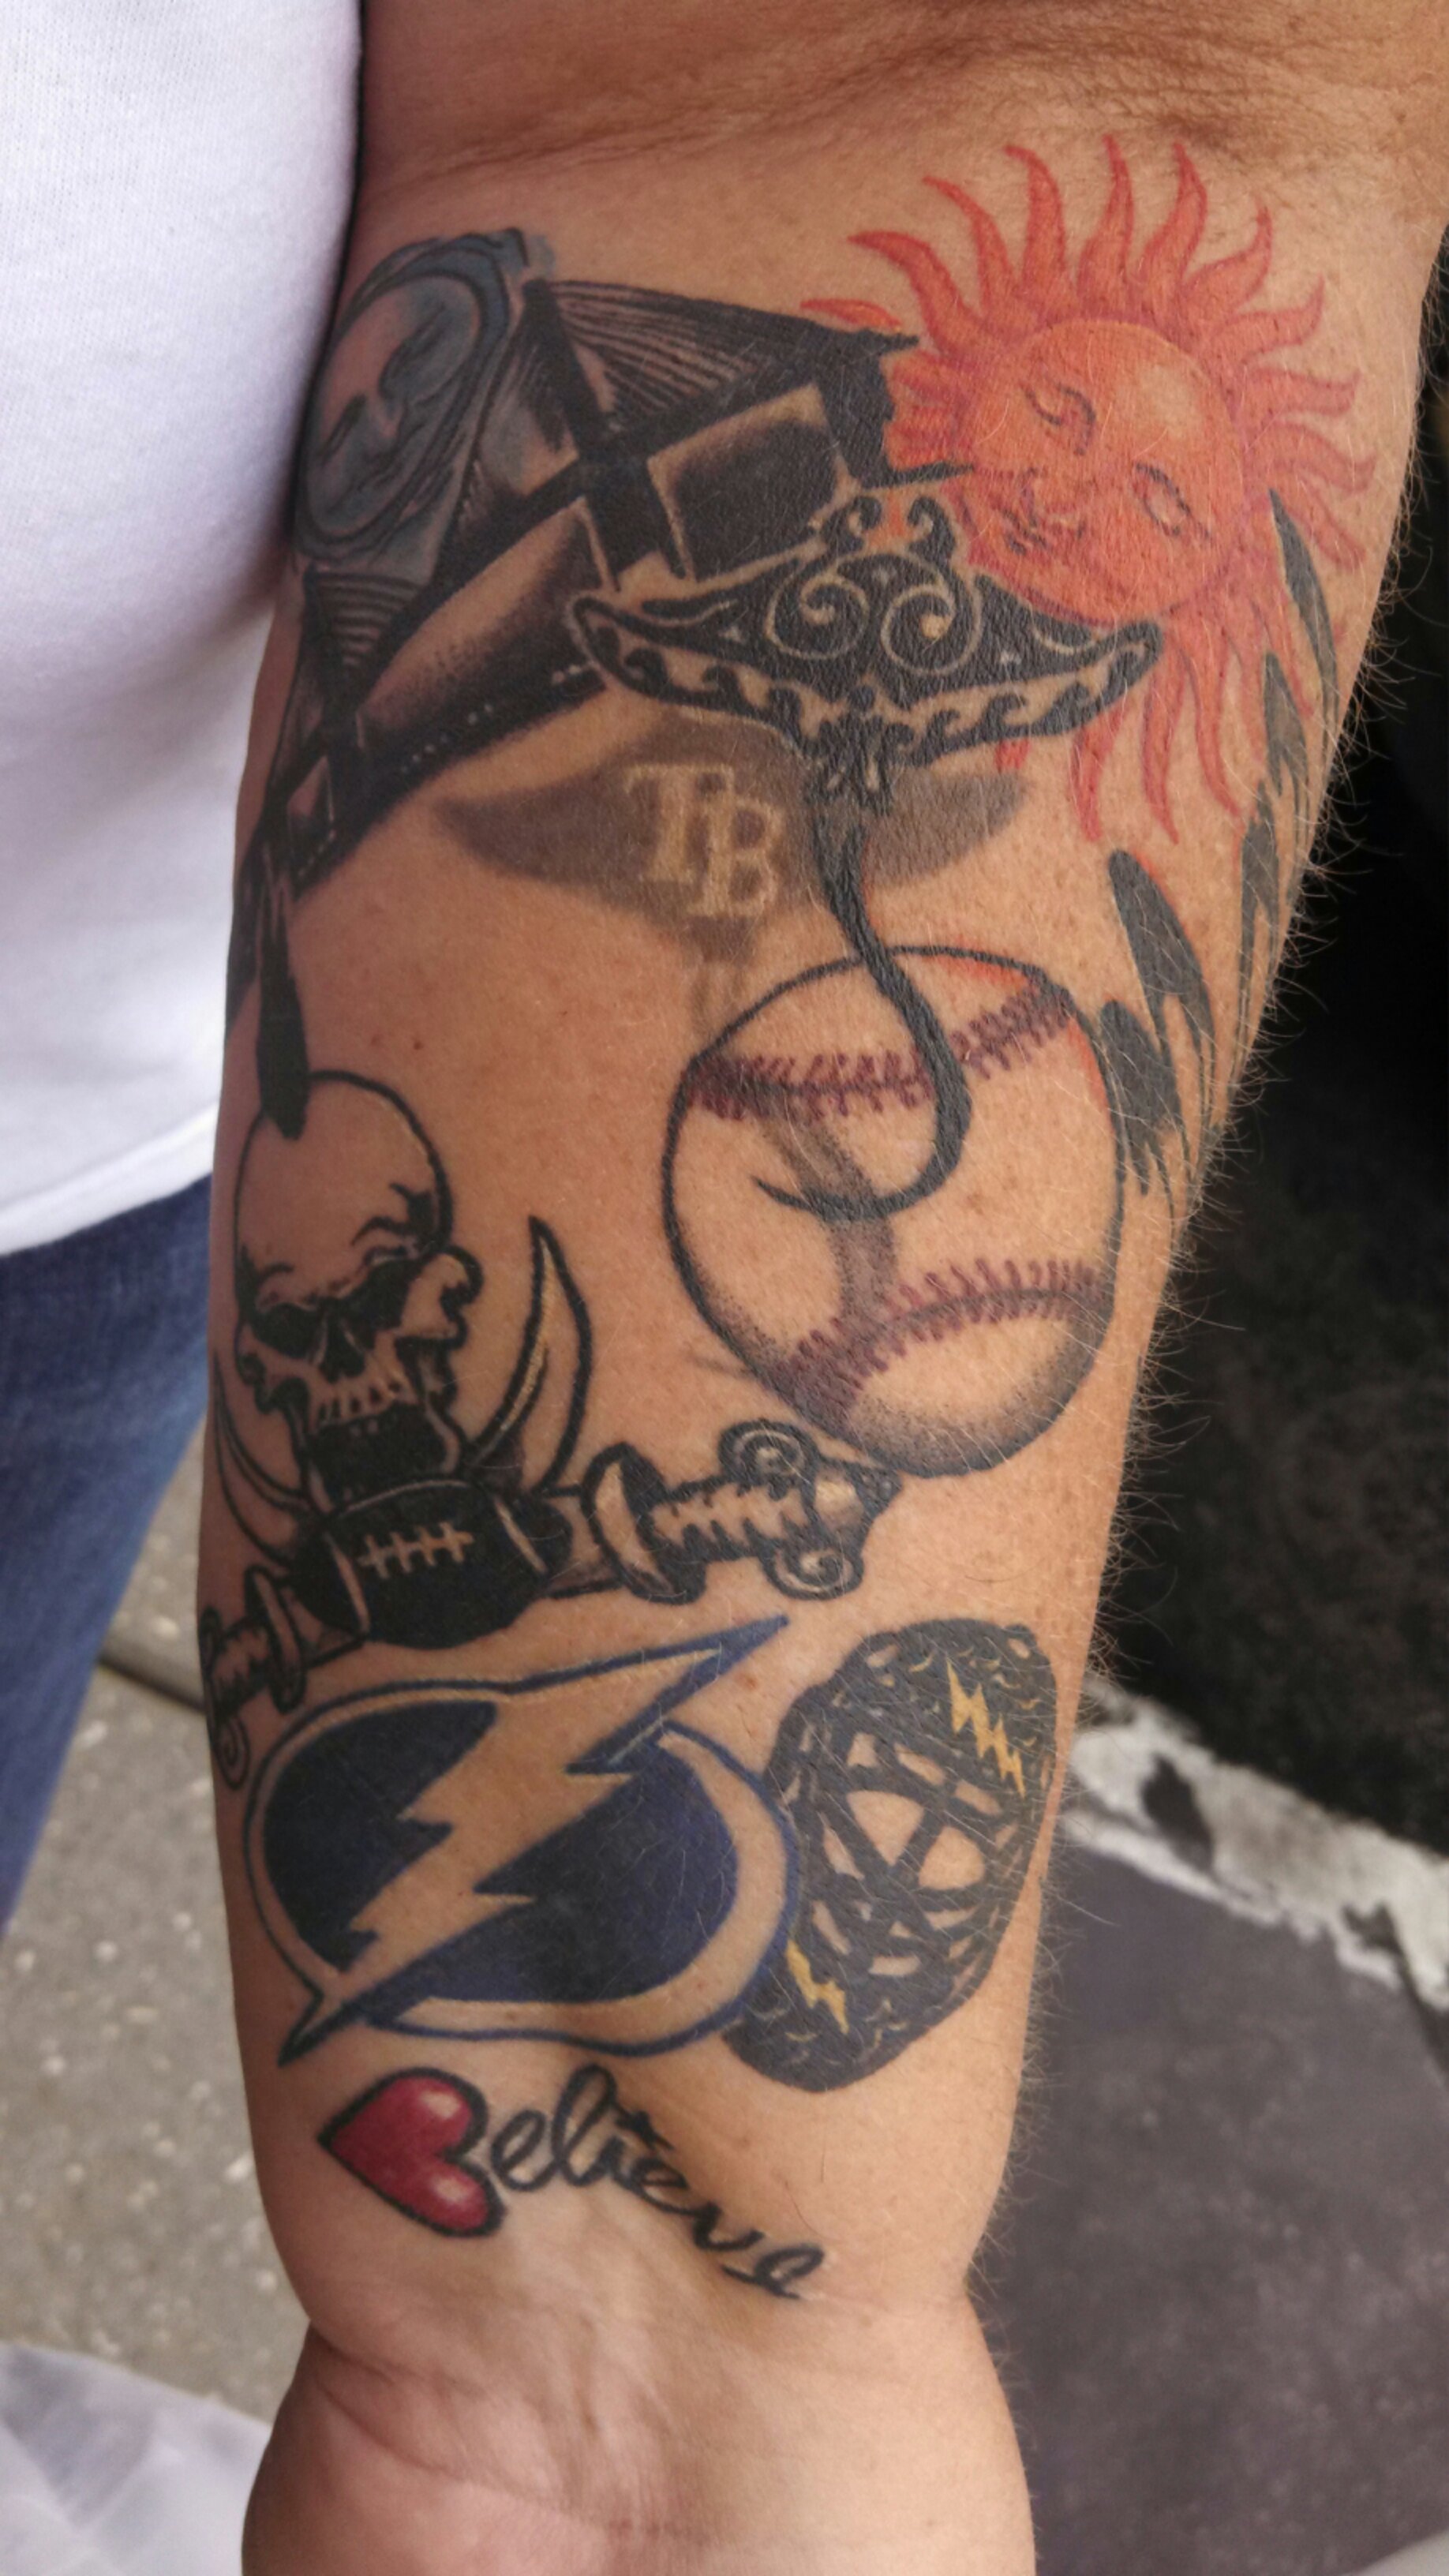 The Best Tampa Bay Tattoo Ever